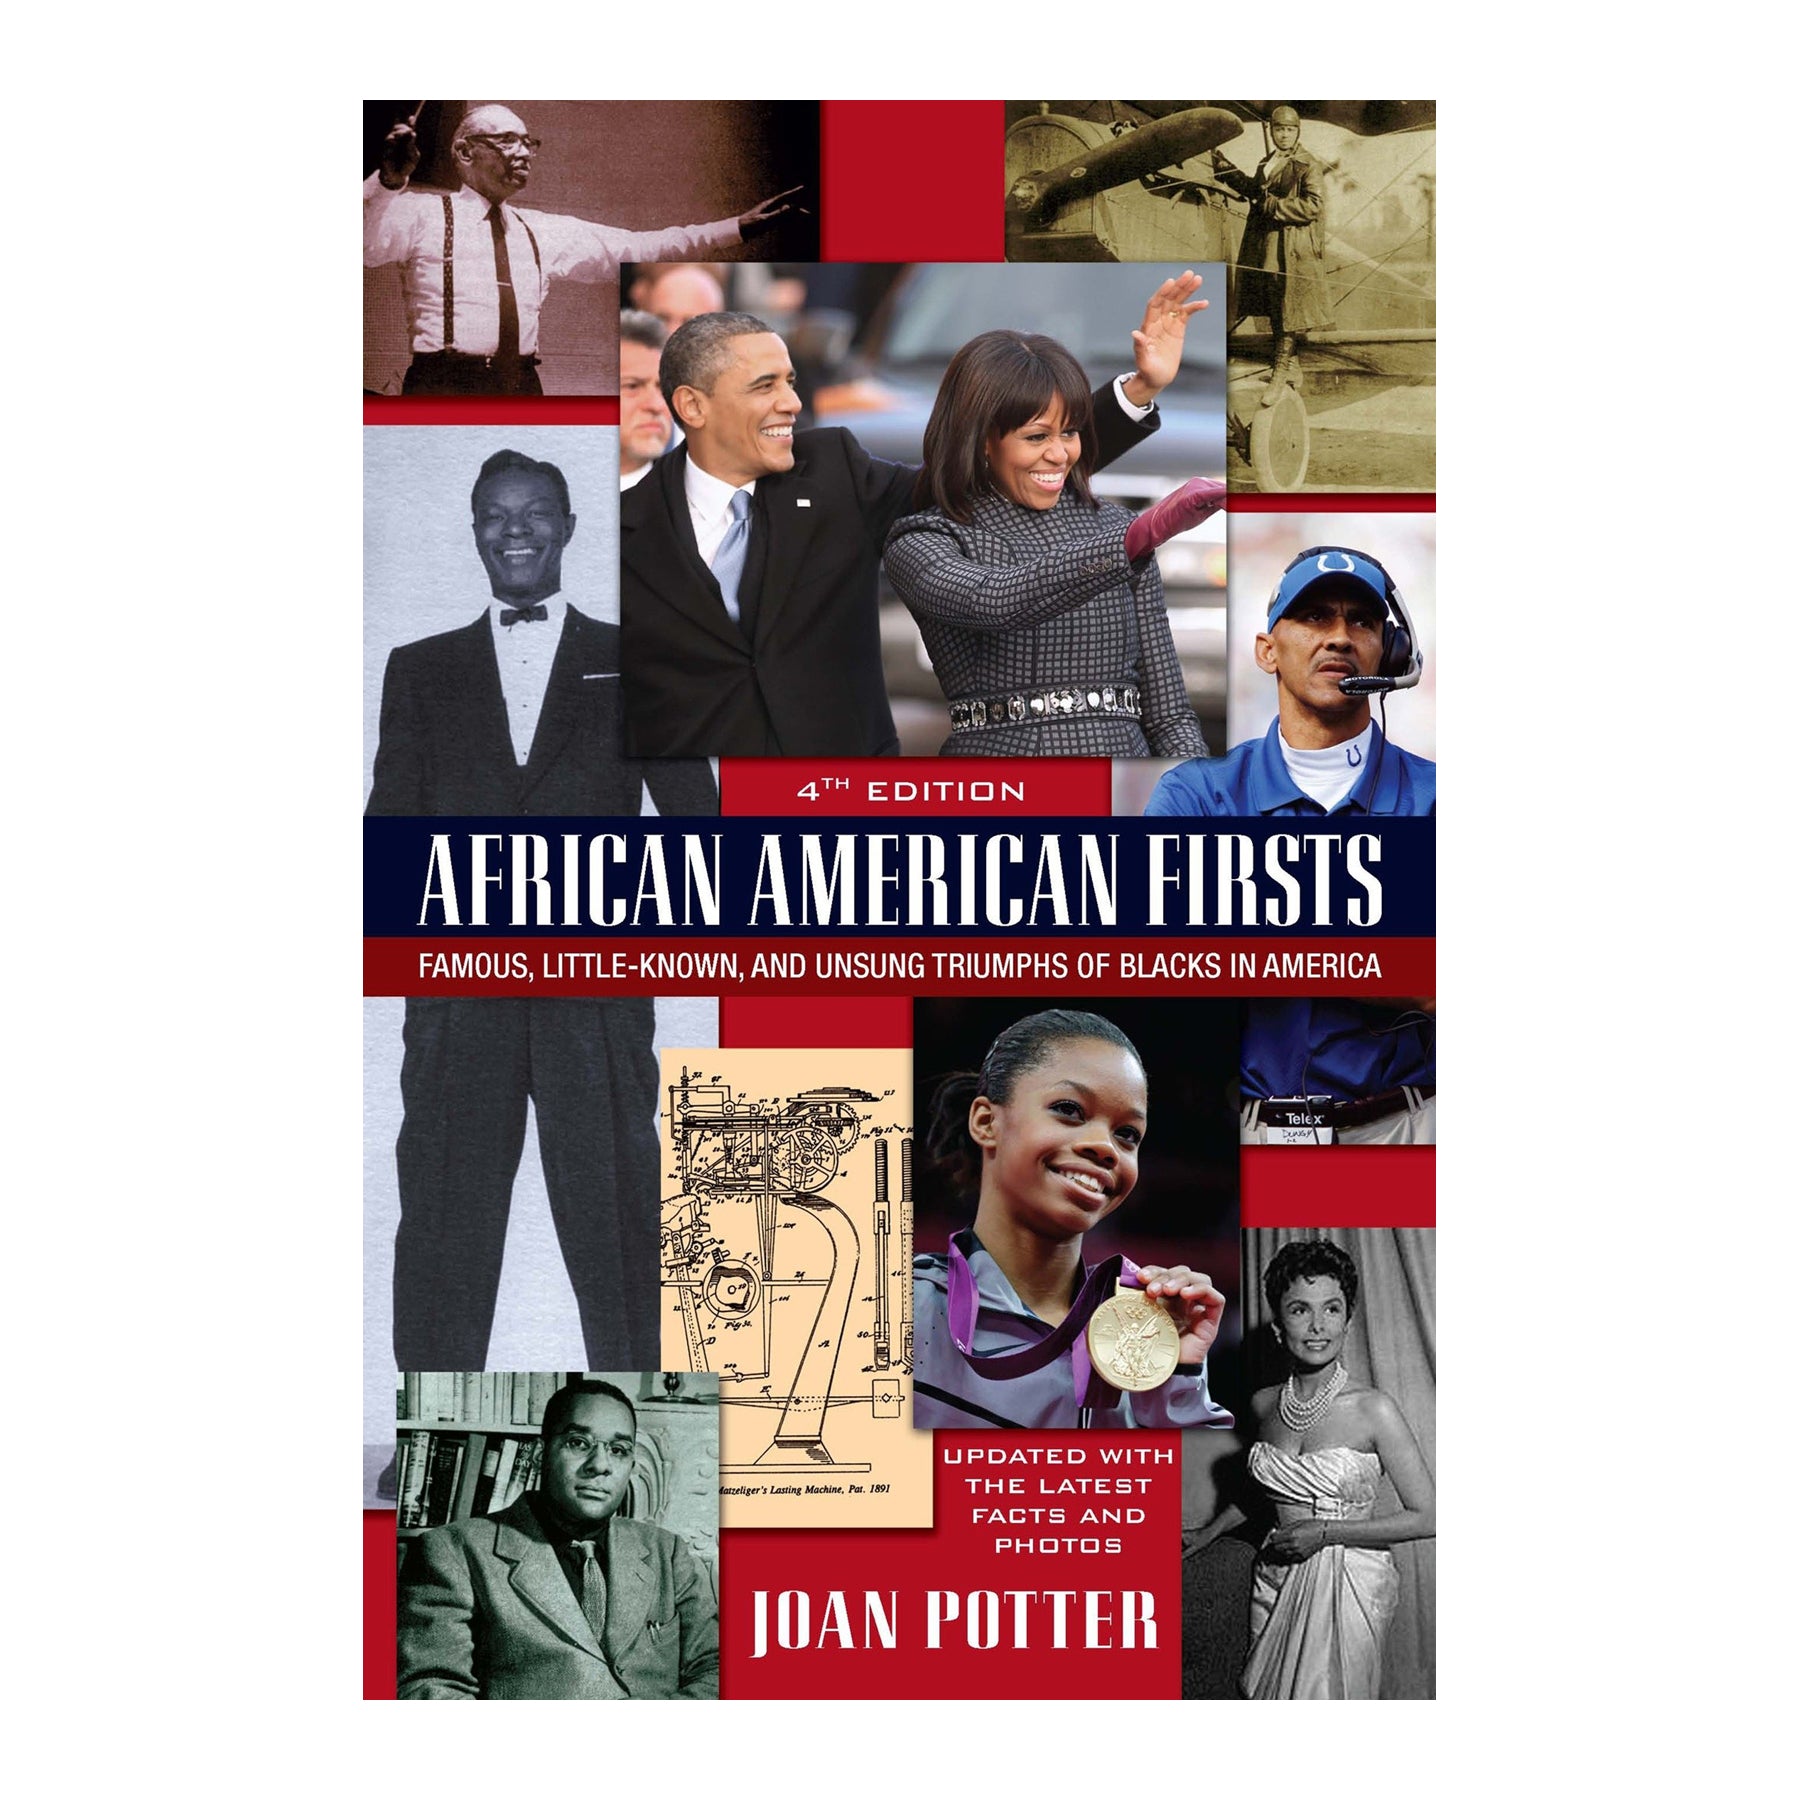 African American Firsts, 4th Edition: Famous, Little-Known And Unsung Triumphs Of Blacks In America